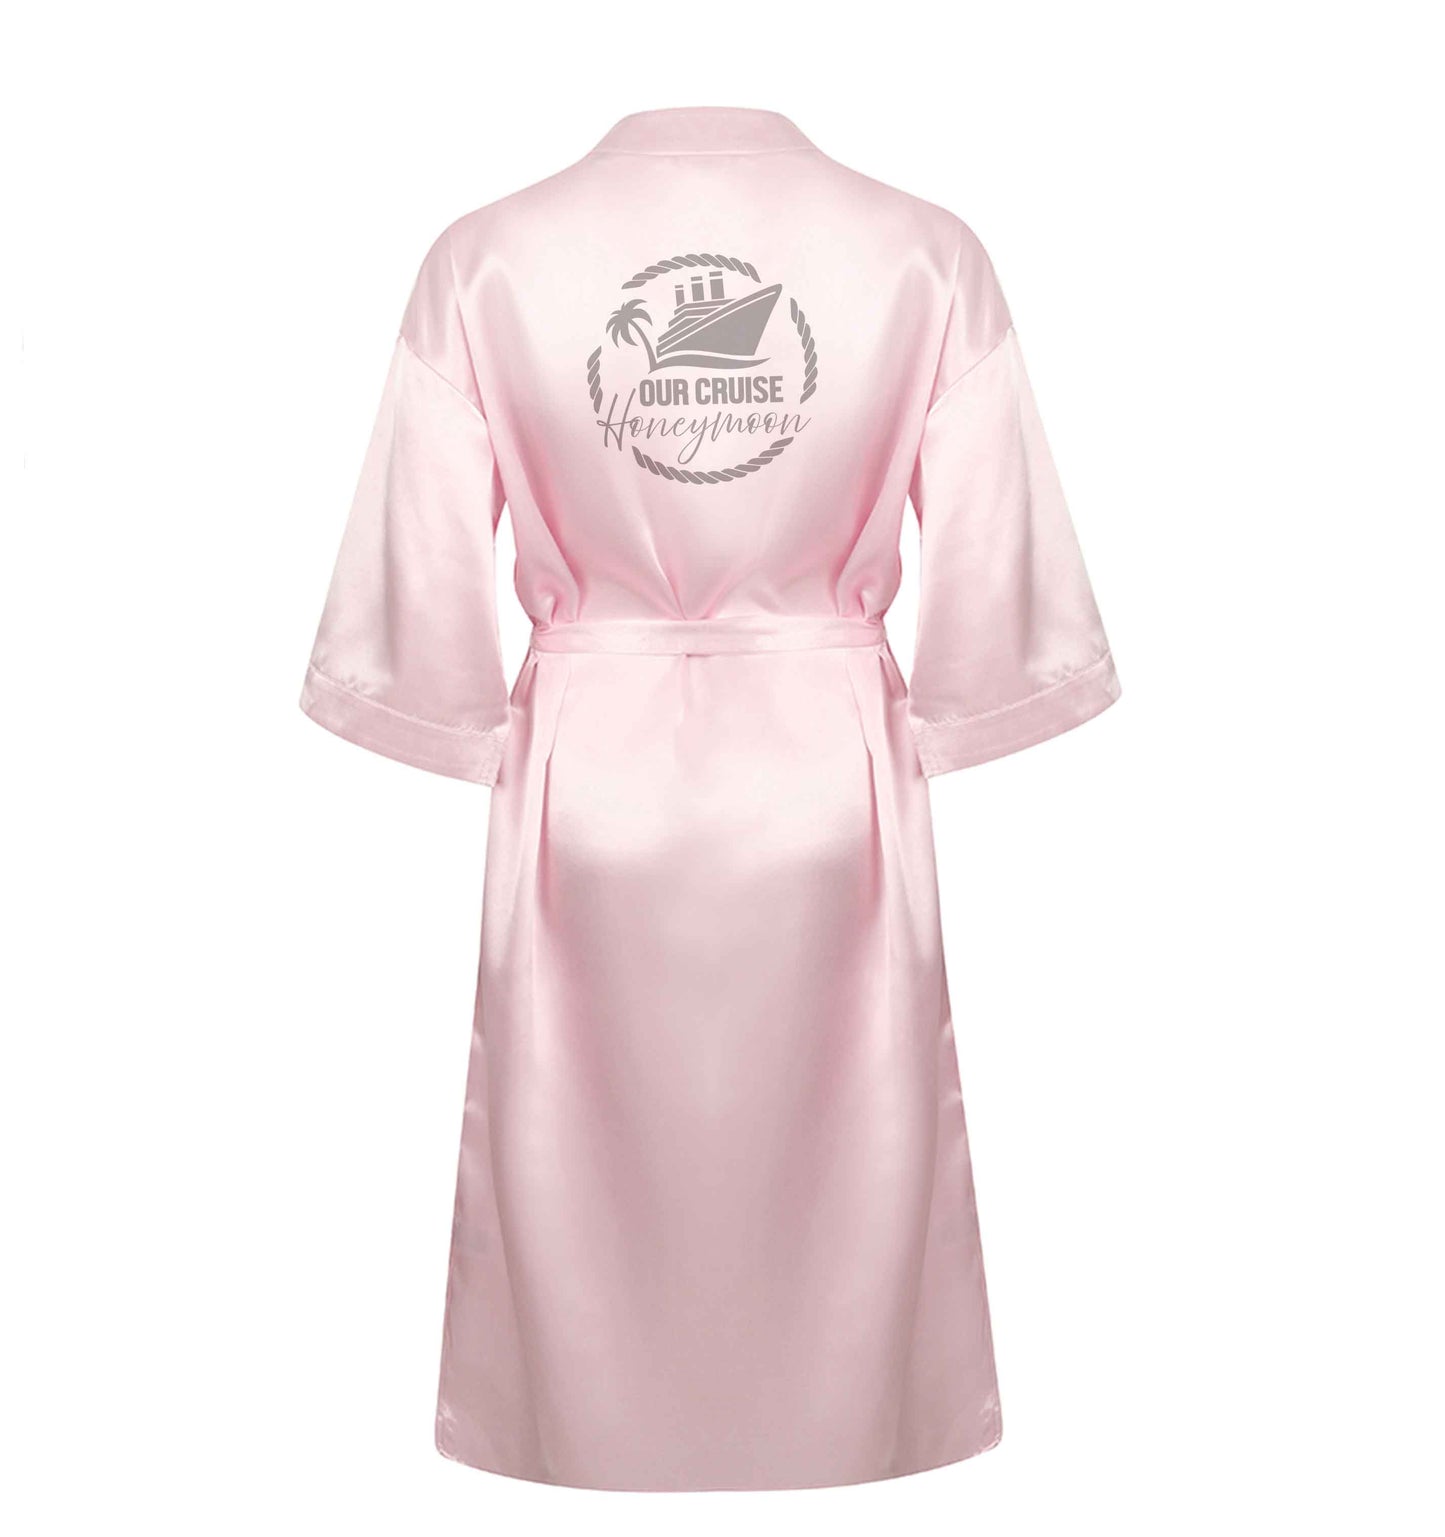 Our cruise honeymoon XL/XXL pink ladies dressing gown size 16/18